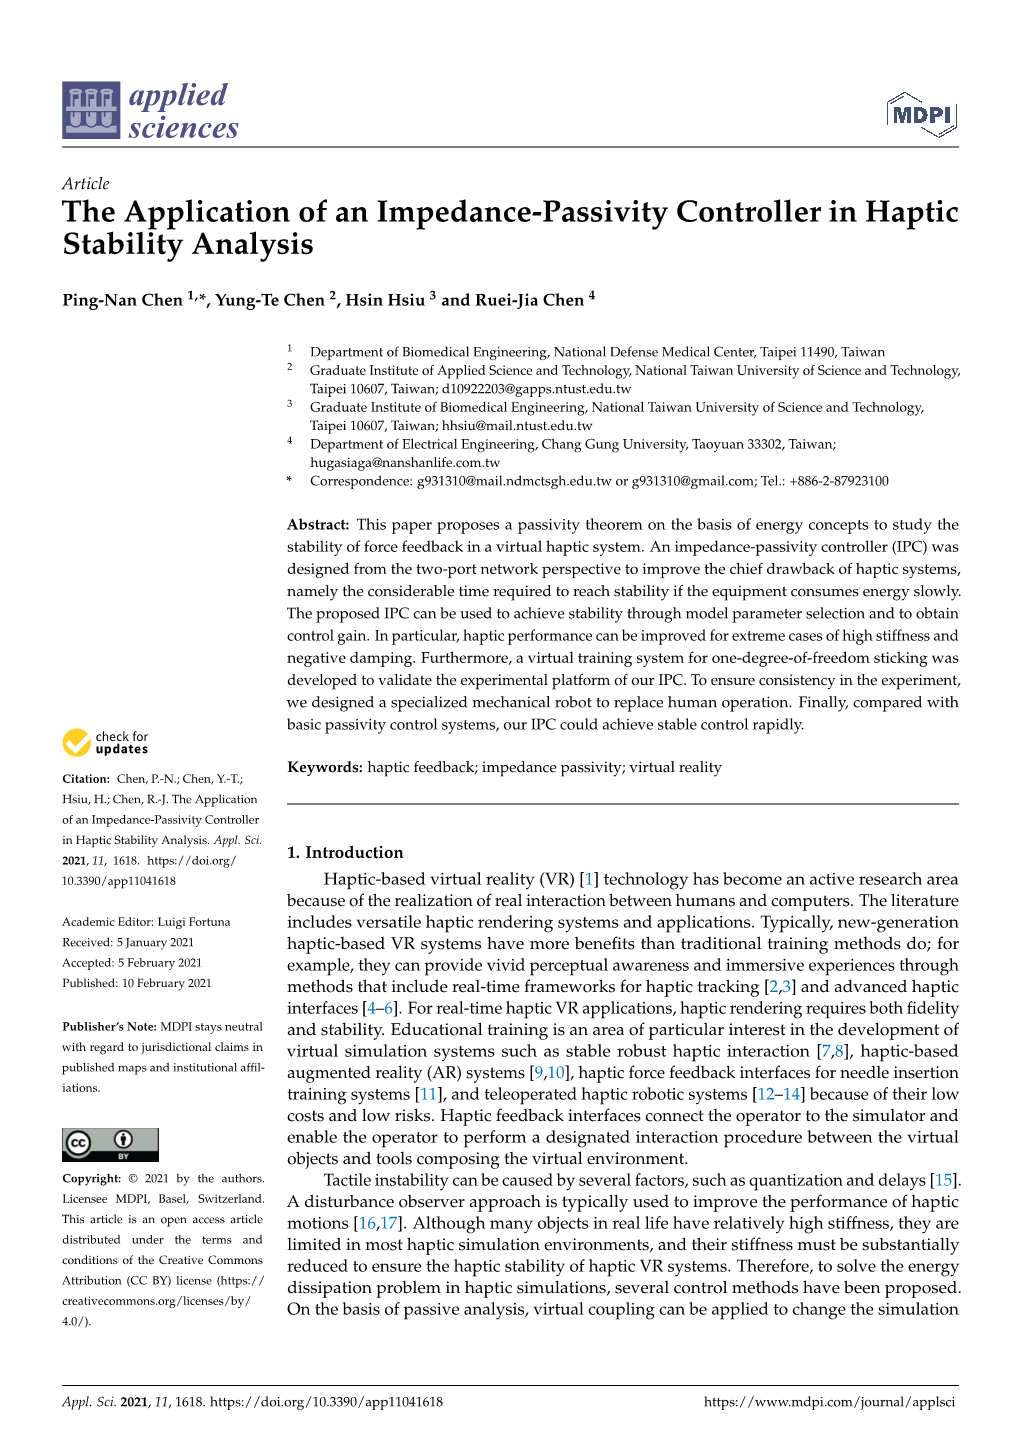 The Application of an Impedance-Passivity Controller in Haptic Stability Analysis